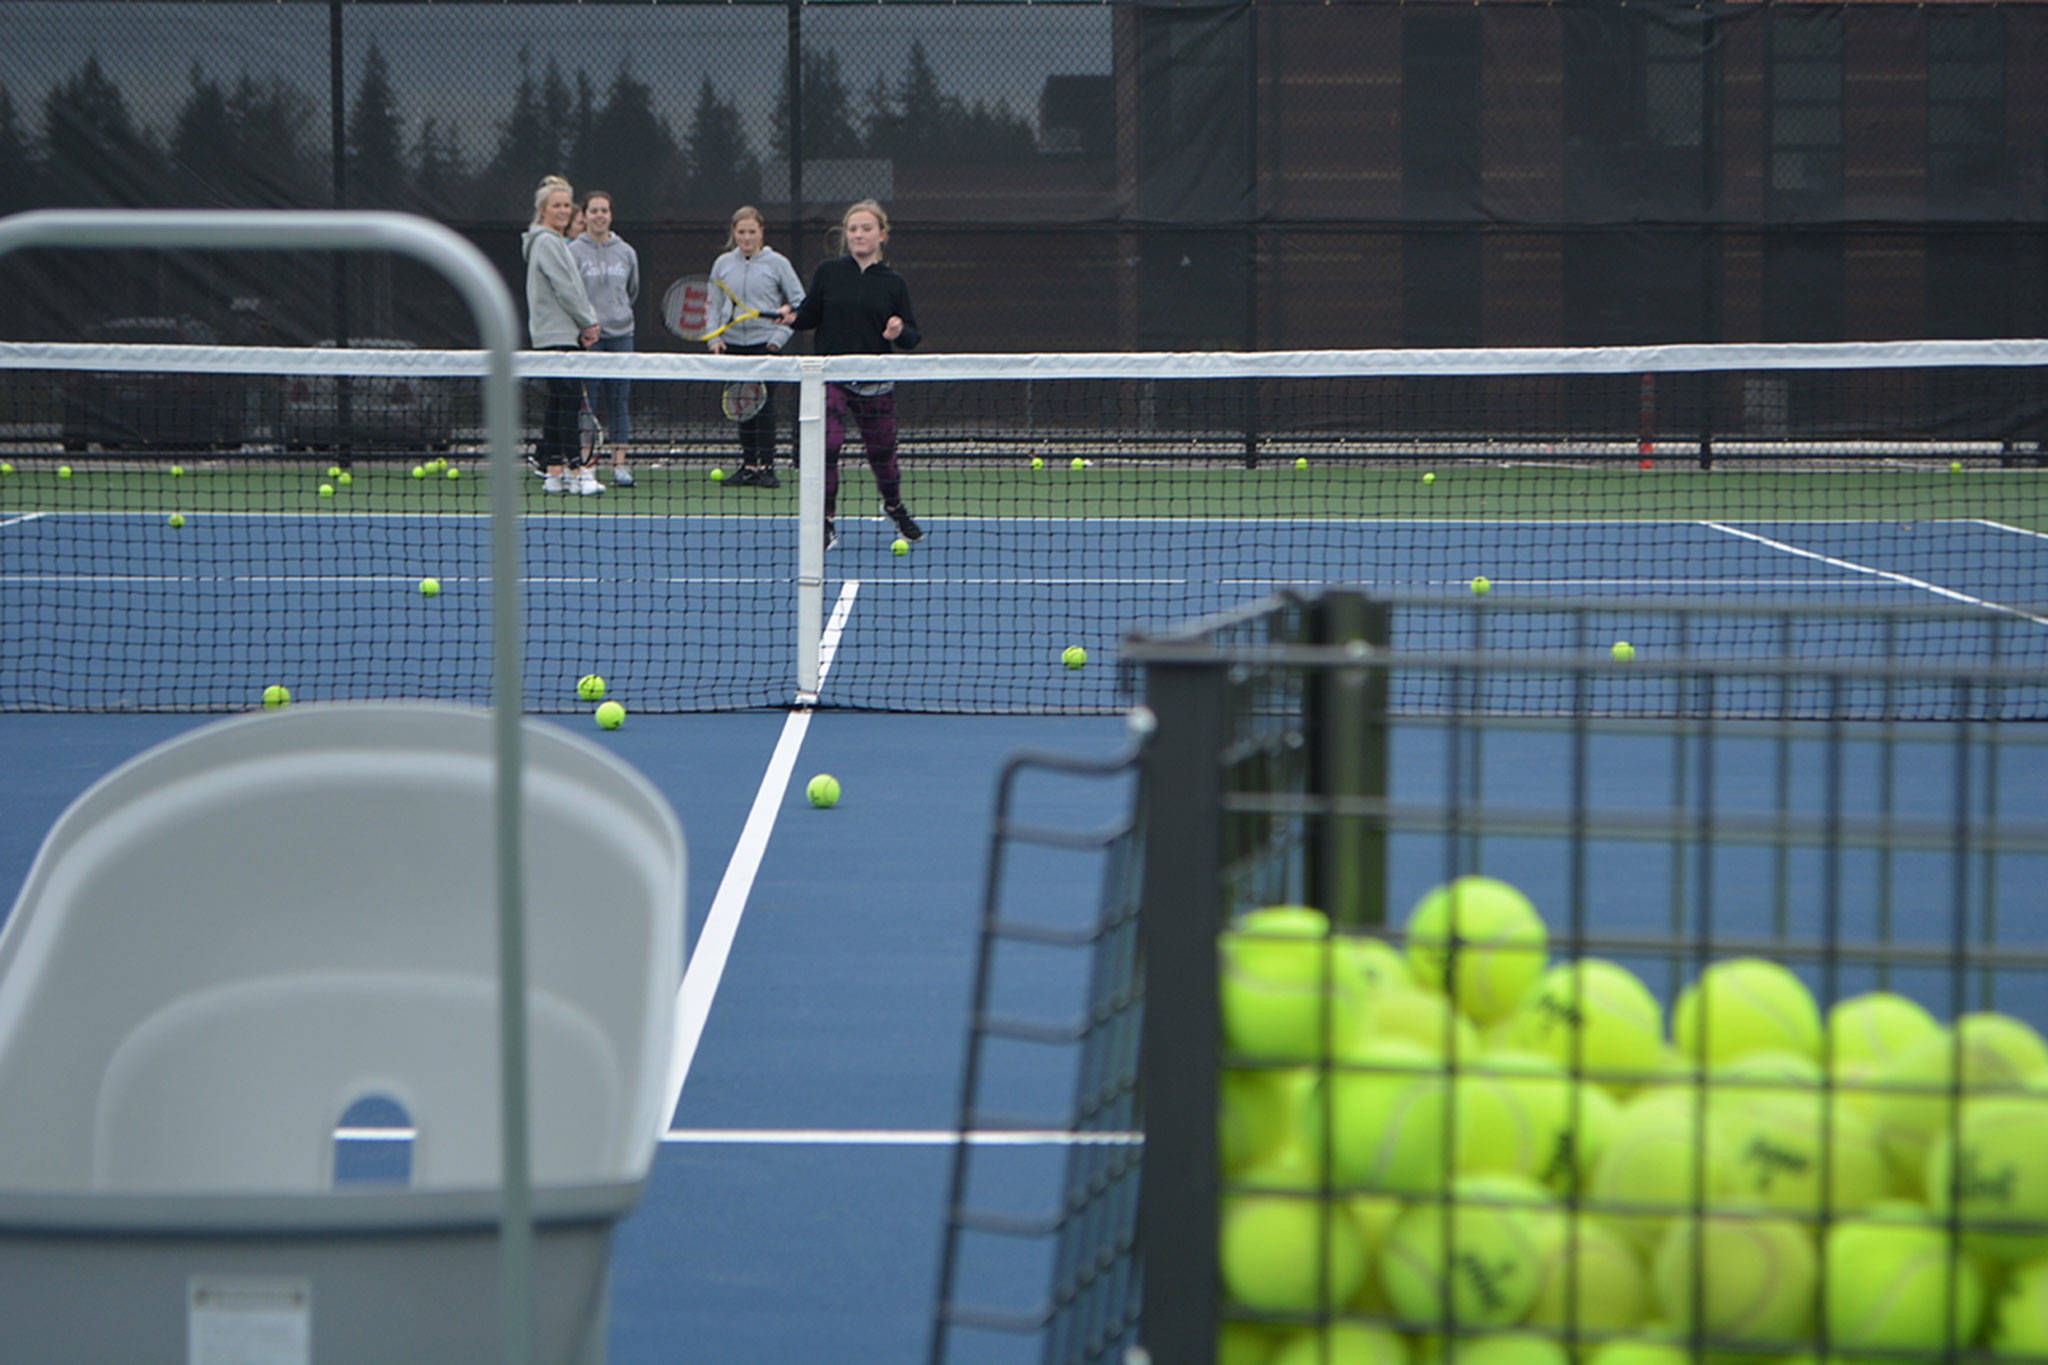 LHS girls tennis loves new courts at home (slide show)